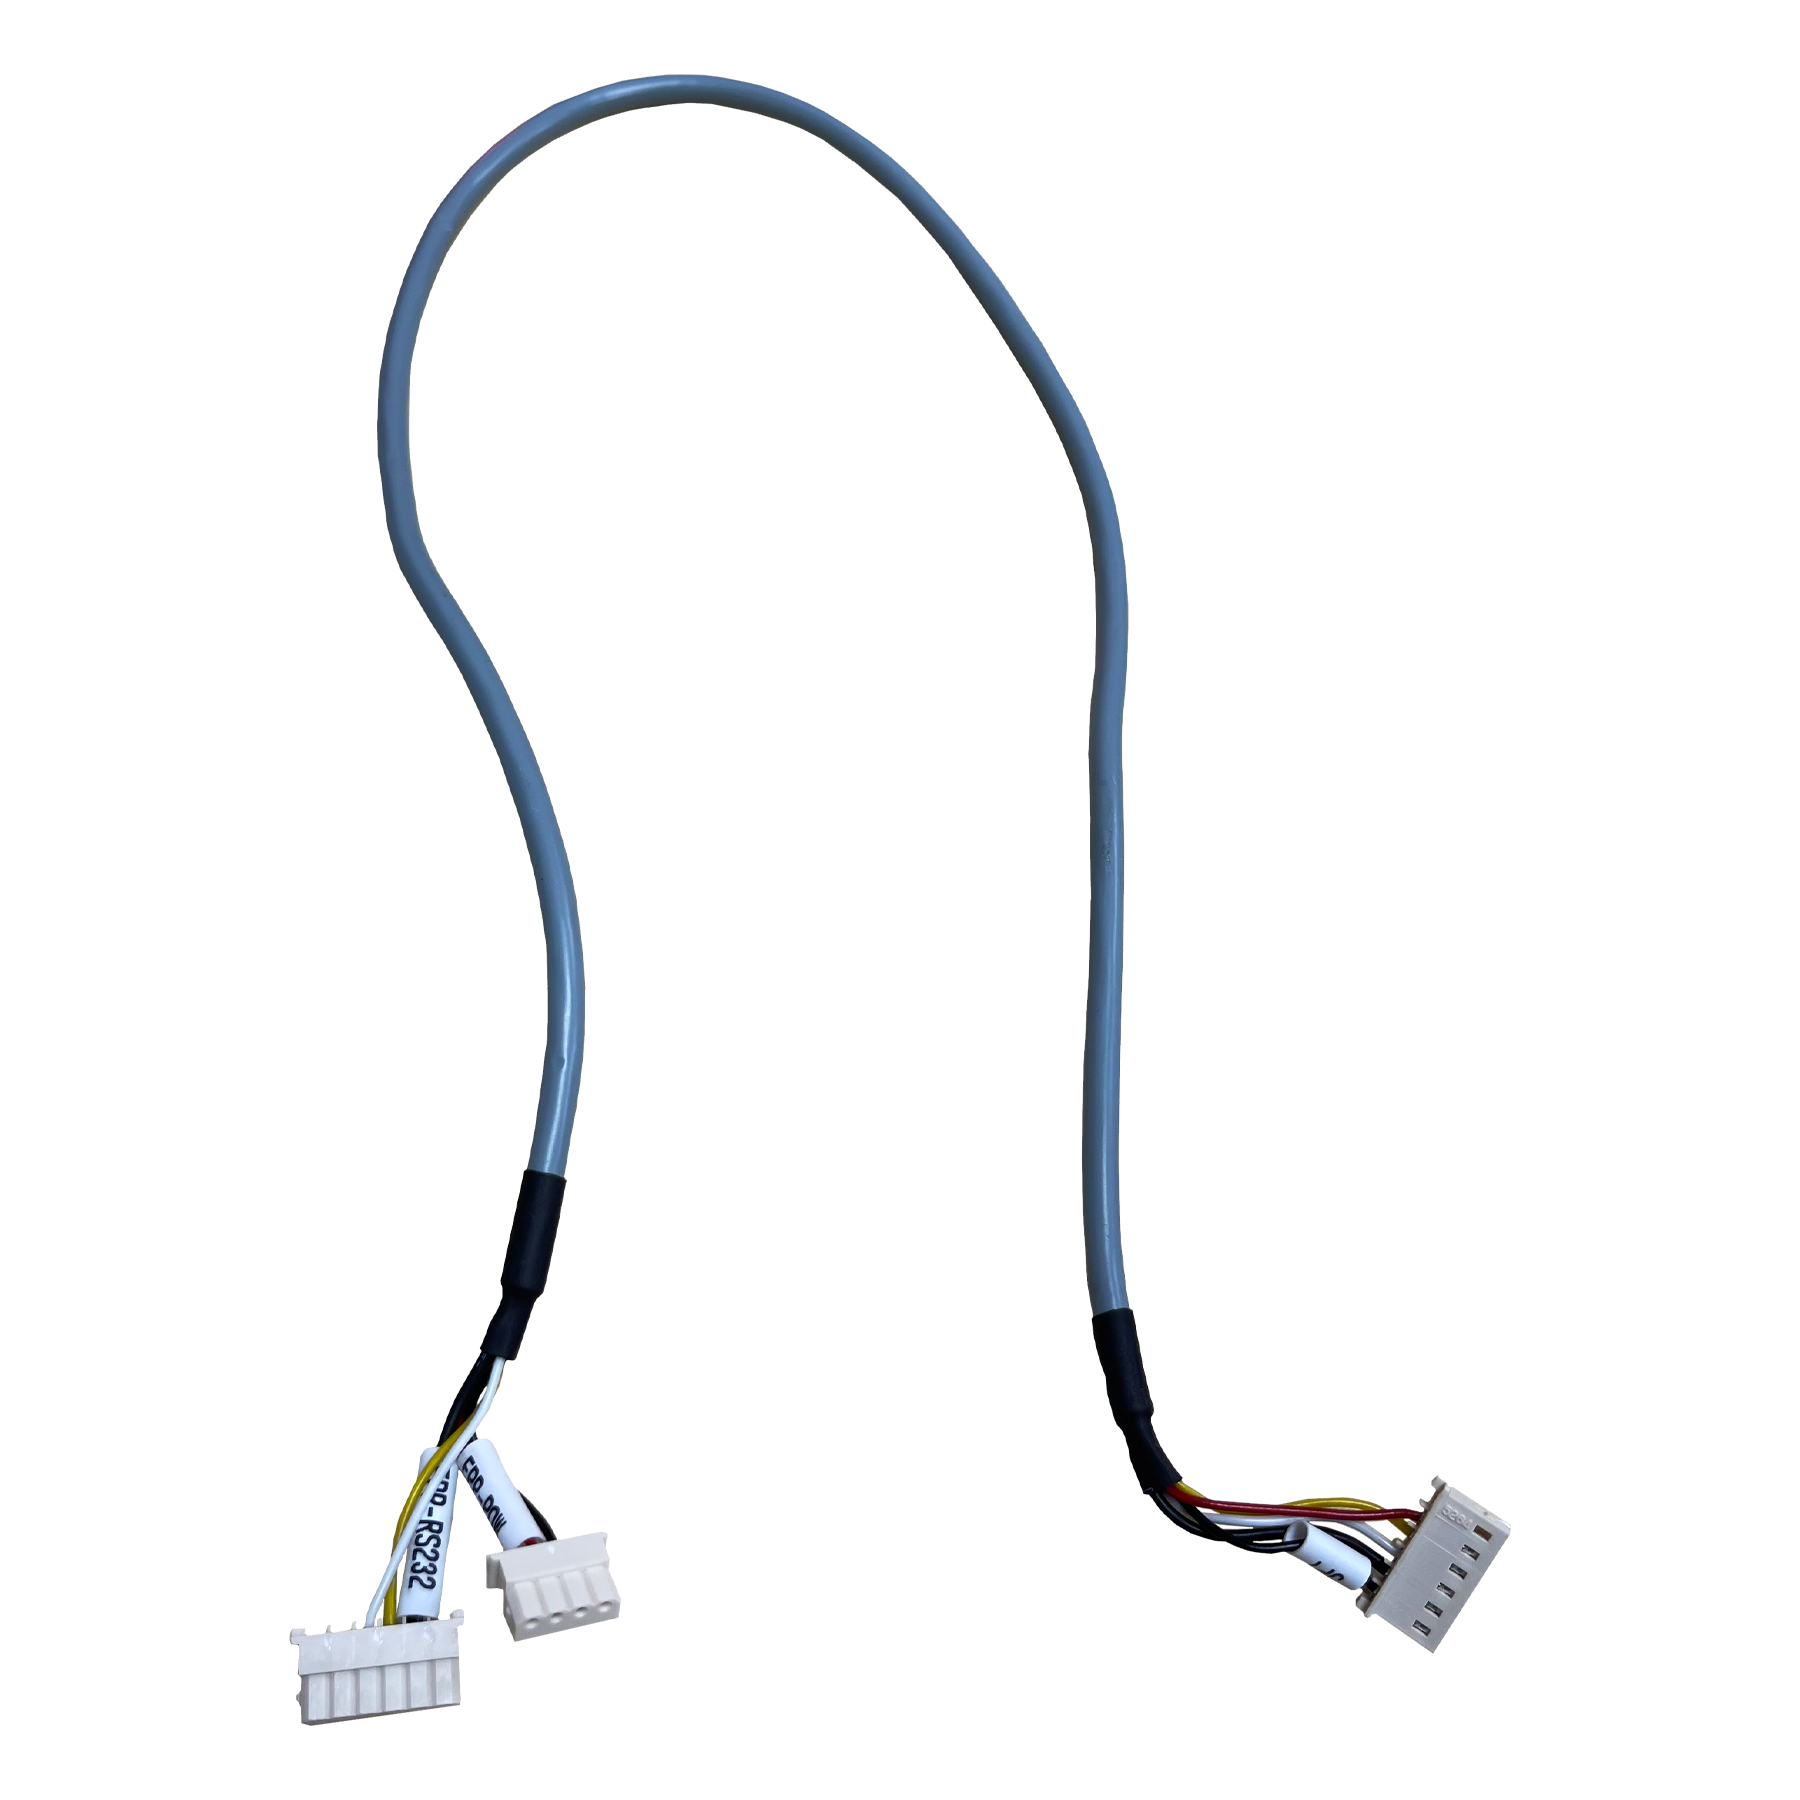 Sold by Miele Manufacturing (Miele MFG). Genmega B5 PCI V5 Keypad and Bracket. Compatible with the Genmega 1700; Genmega 1700W; Genmega C4000; Genmega E4000; Genmega G1900; Genmega GT3000; Genmega Onyx Series; Genmega Onyx W; Genmega X4000; Genmega Universal Kiosk; Genmega Bitcoin ATM. New keypad and bracket, never used. Manufacturer Part Number: 20120754-1